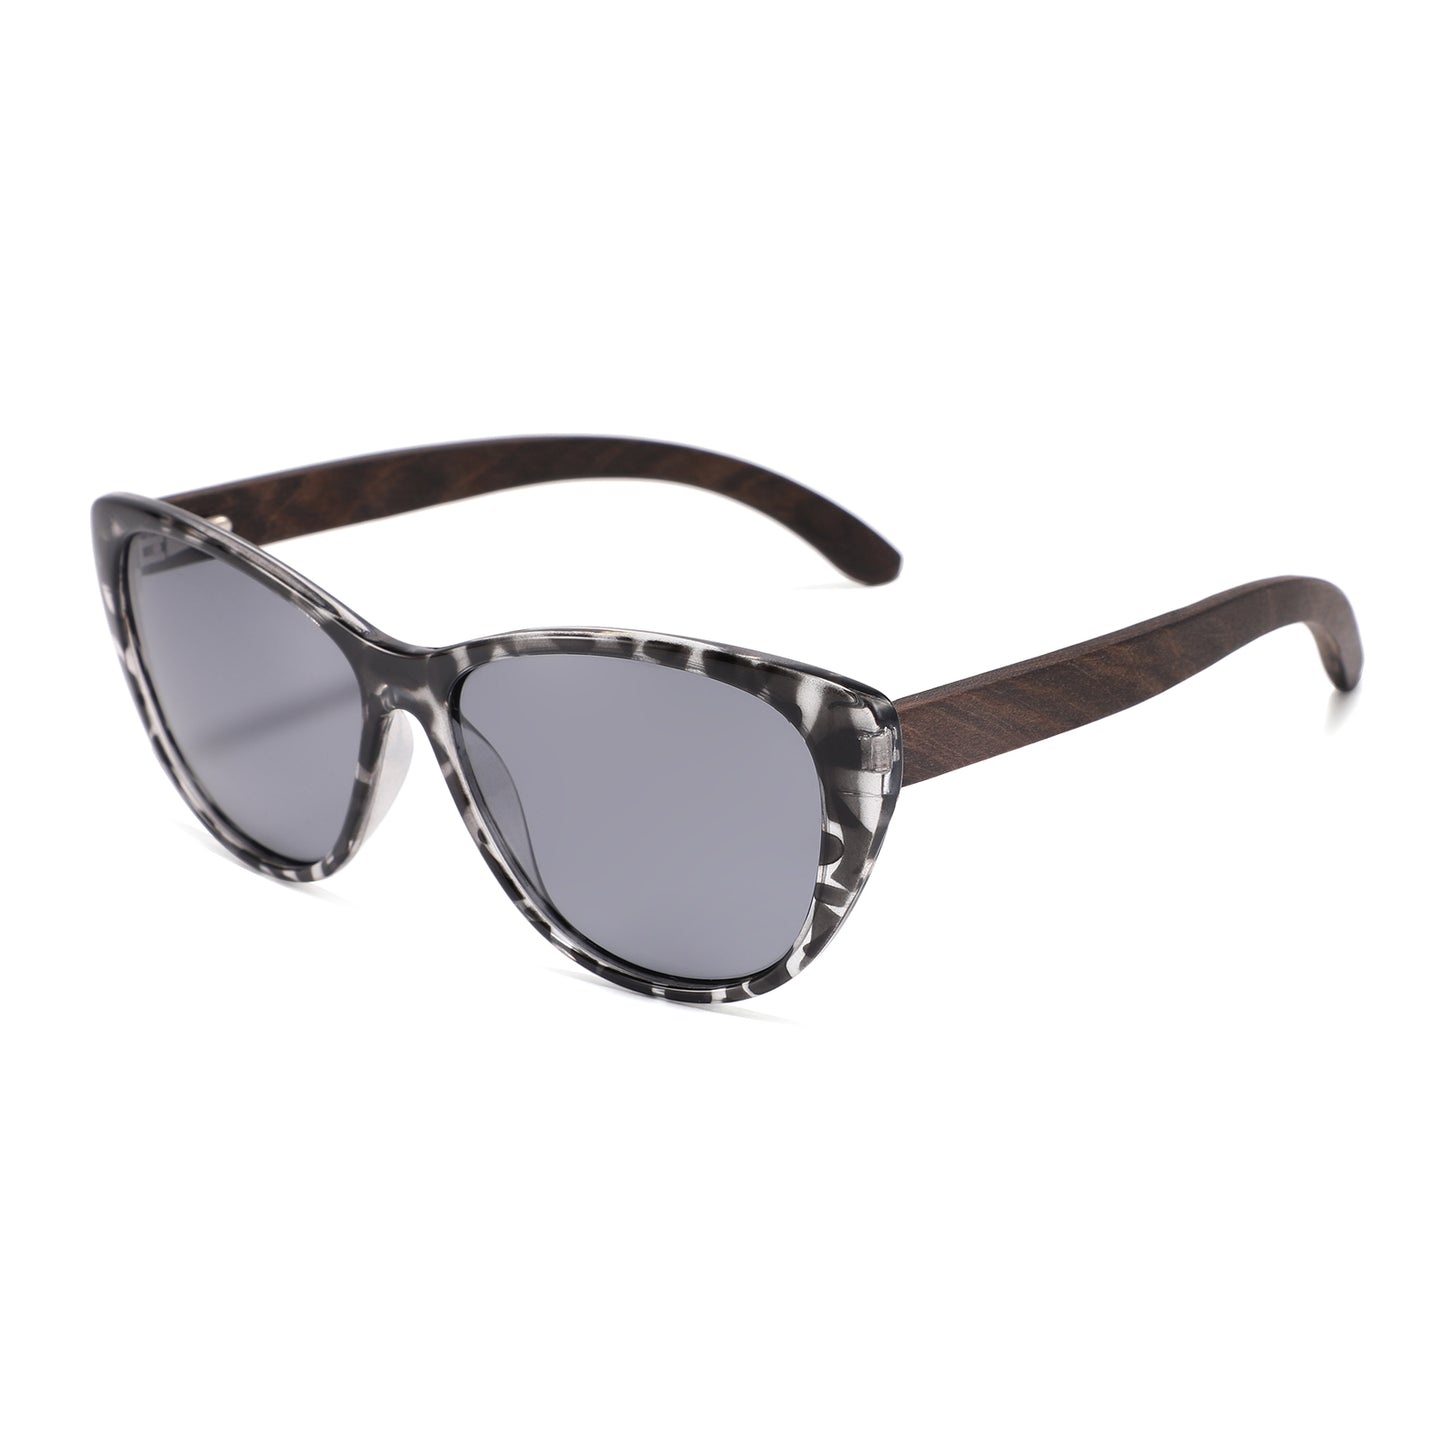 The new, oh-so-flattering Callies in oh-so-trendy black tortoise-shell frame with polarized grey lens and ebony wooden arms.